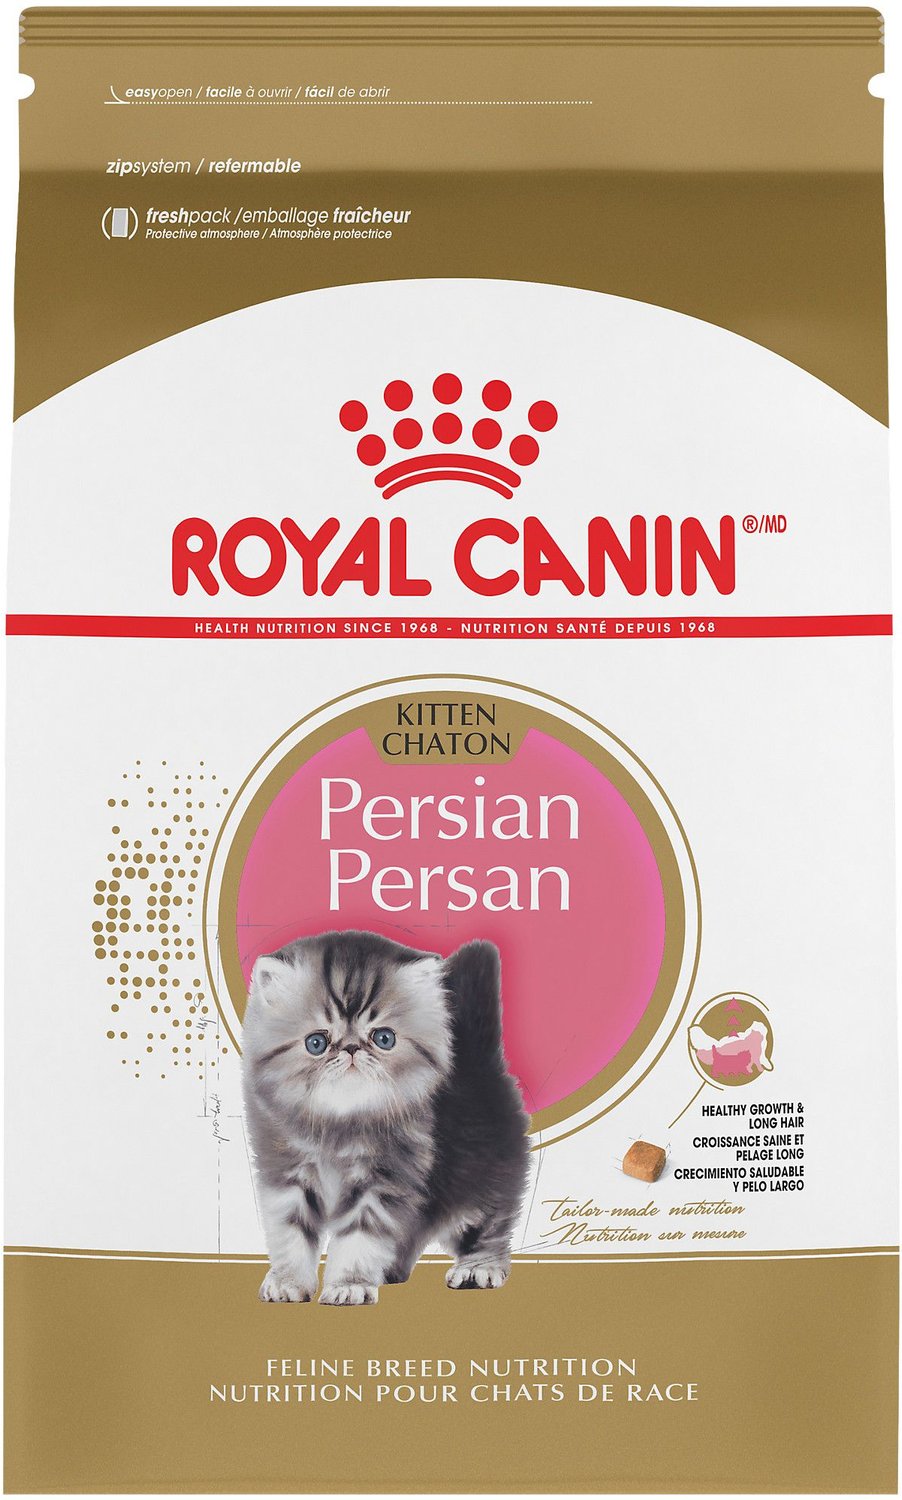 diet for persian cats